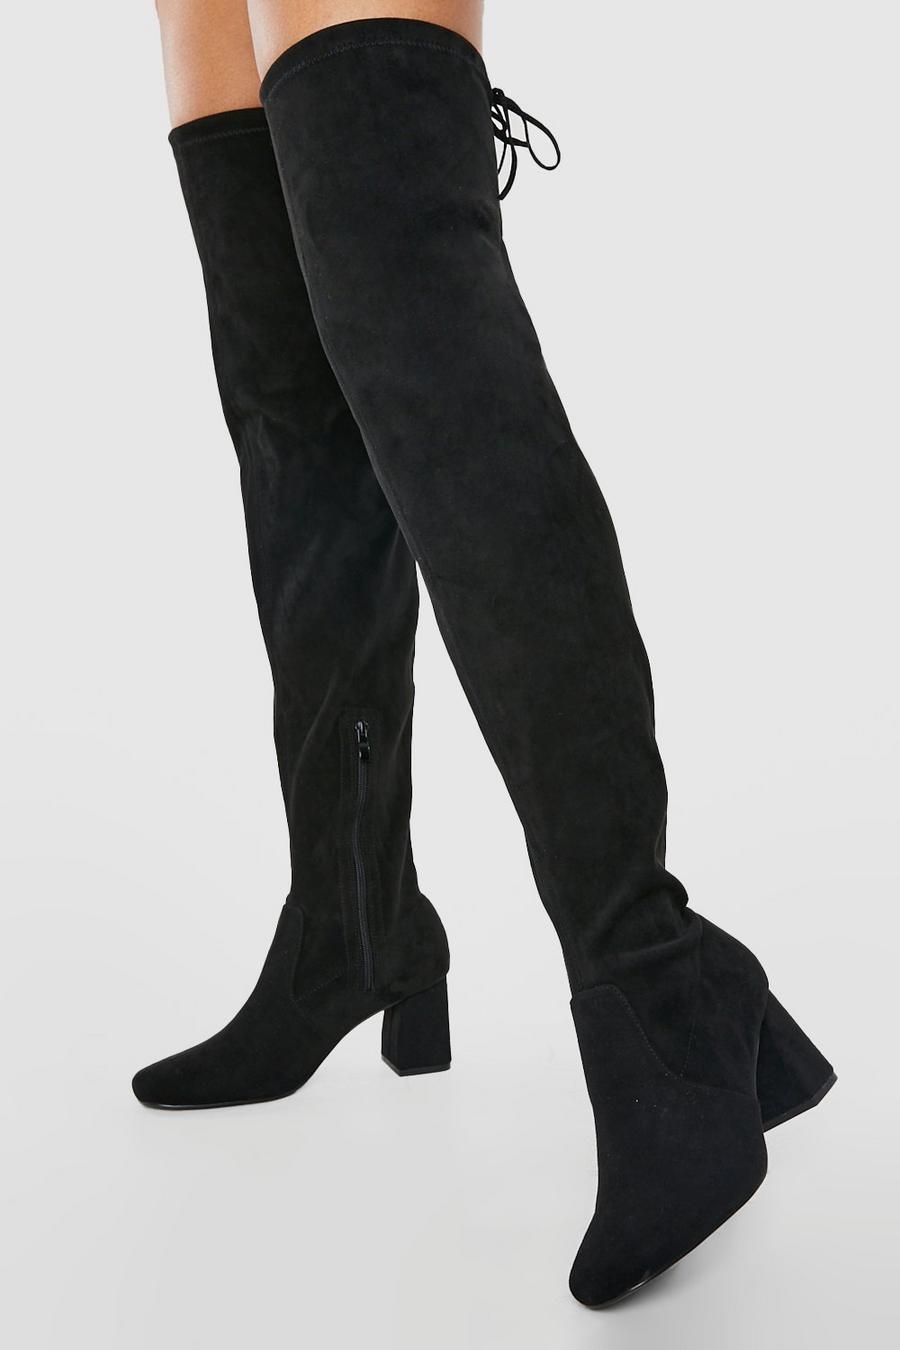 Black negro Wide Fit Over The Knee Block Heeled Boots image number 1